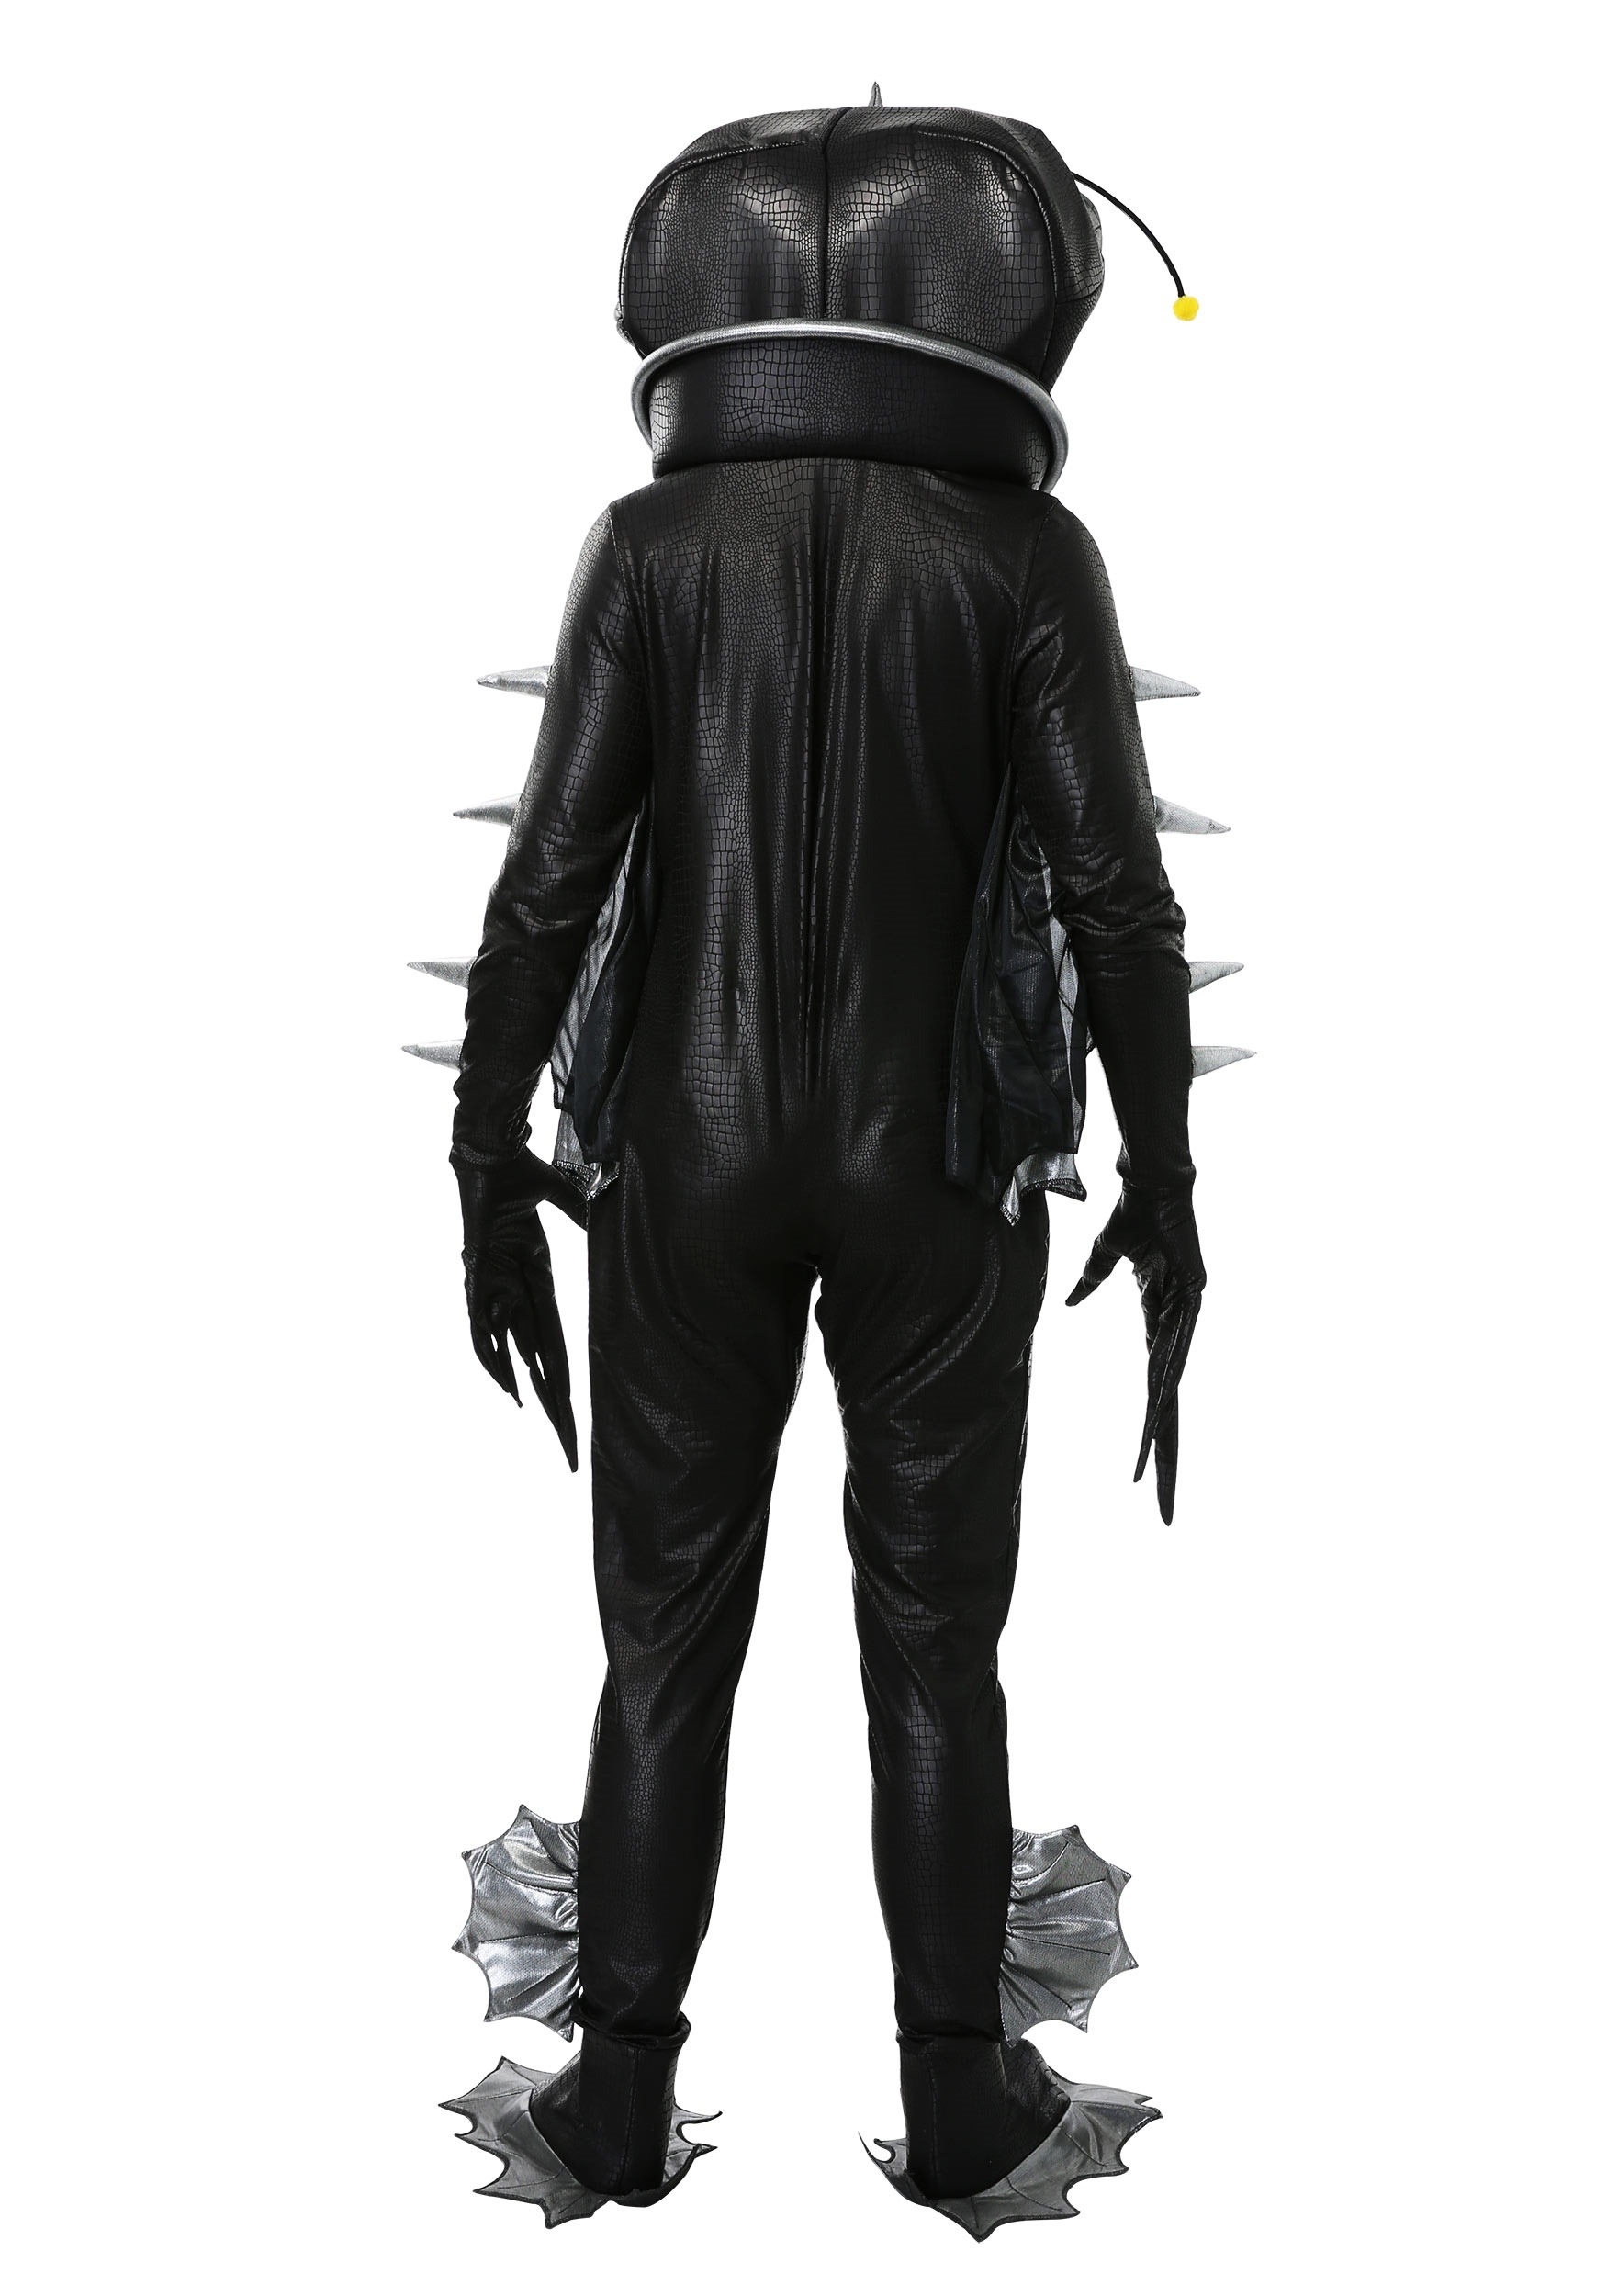 Angler Fish Fancy Dress Costume For Adults , Animal Halloween Fancy Dress Costumes